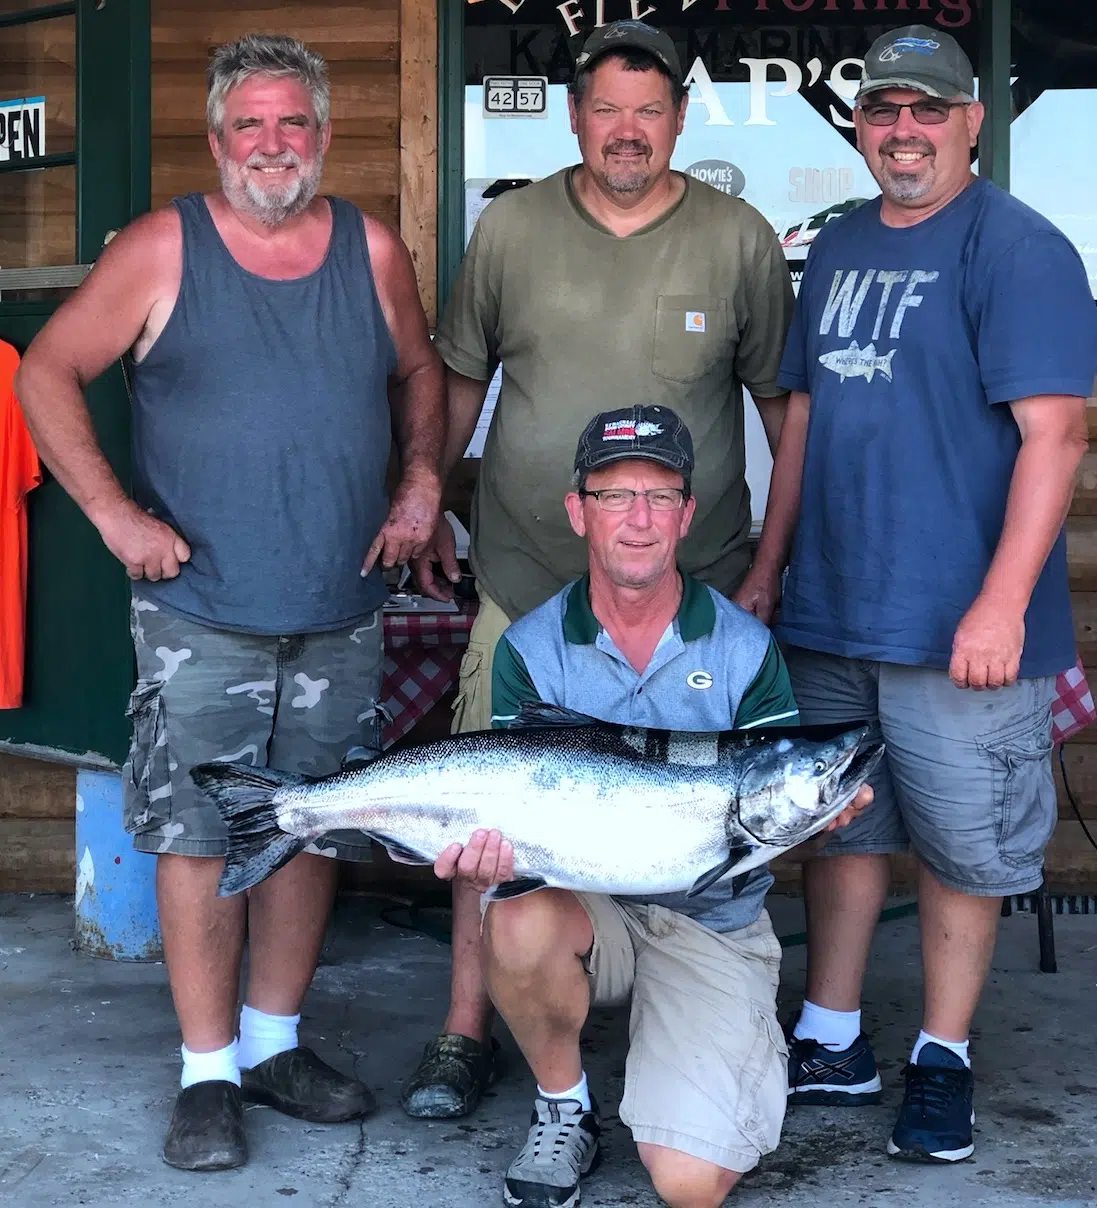 Anglers Find Success Through Three Days of Kewaunee/Door County Salmon